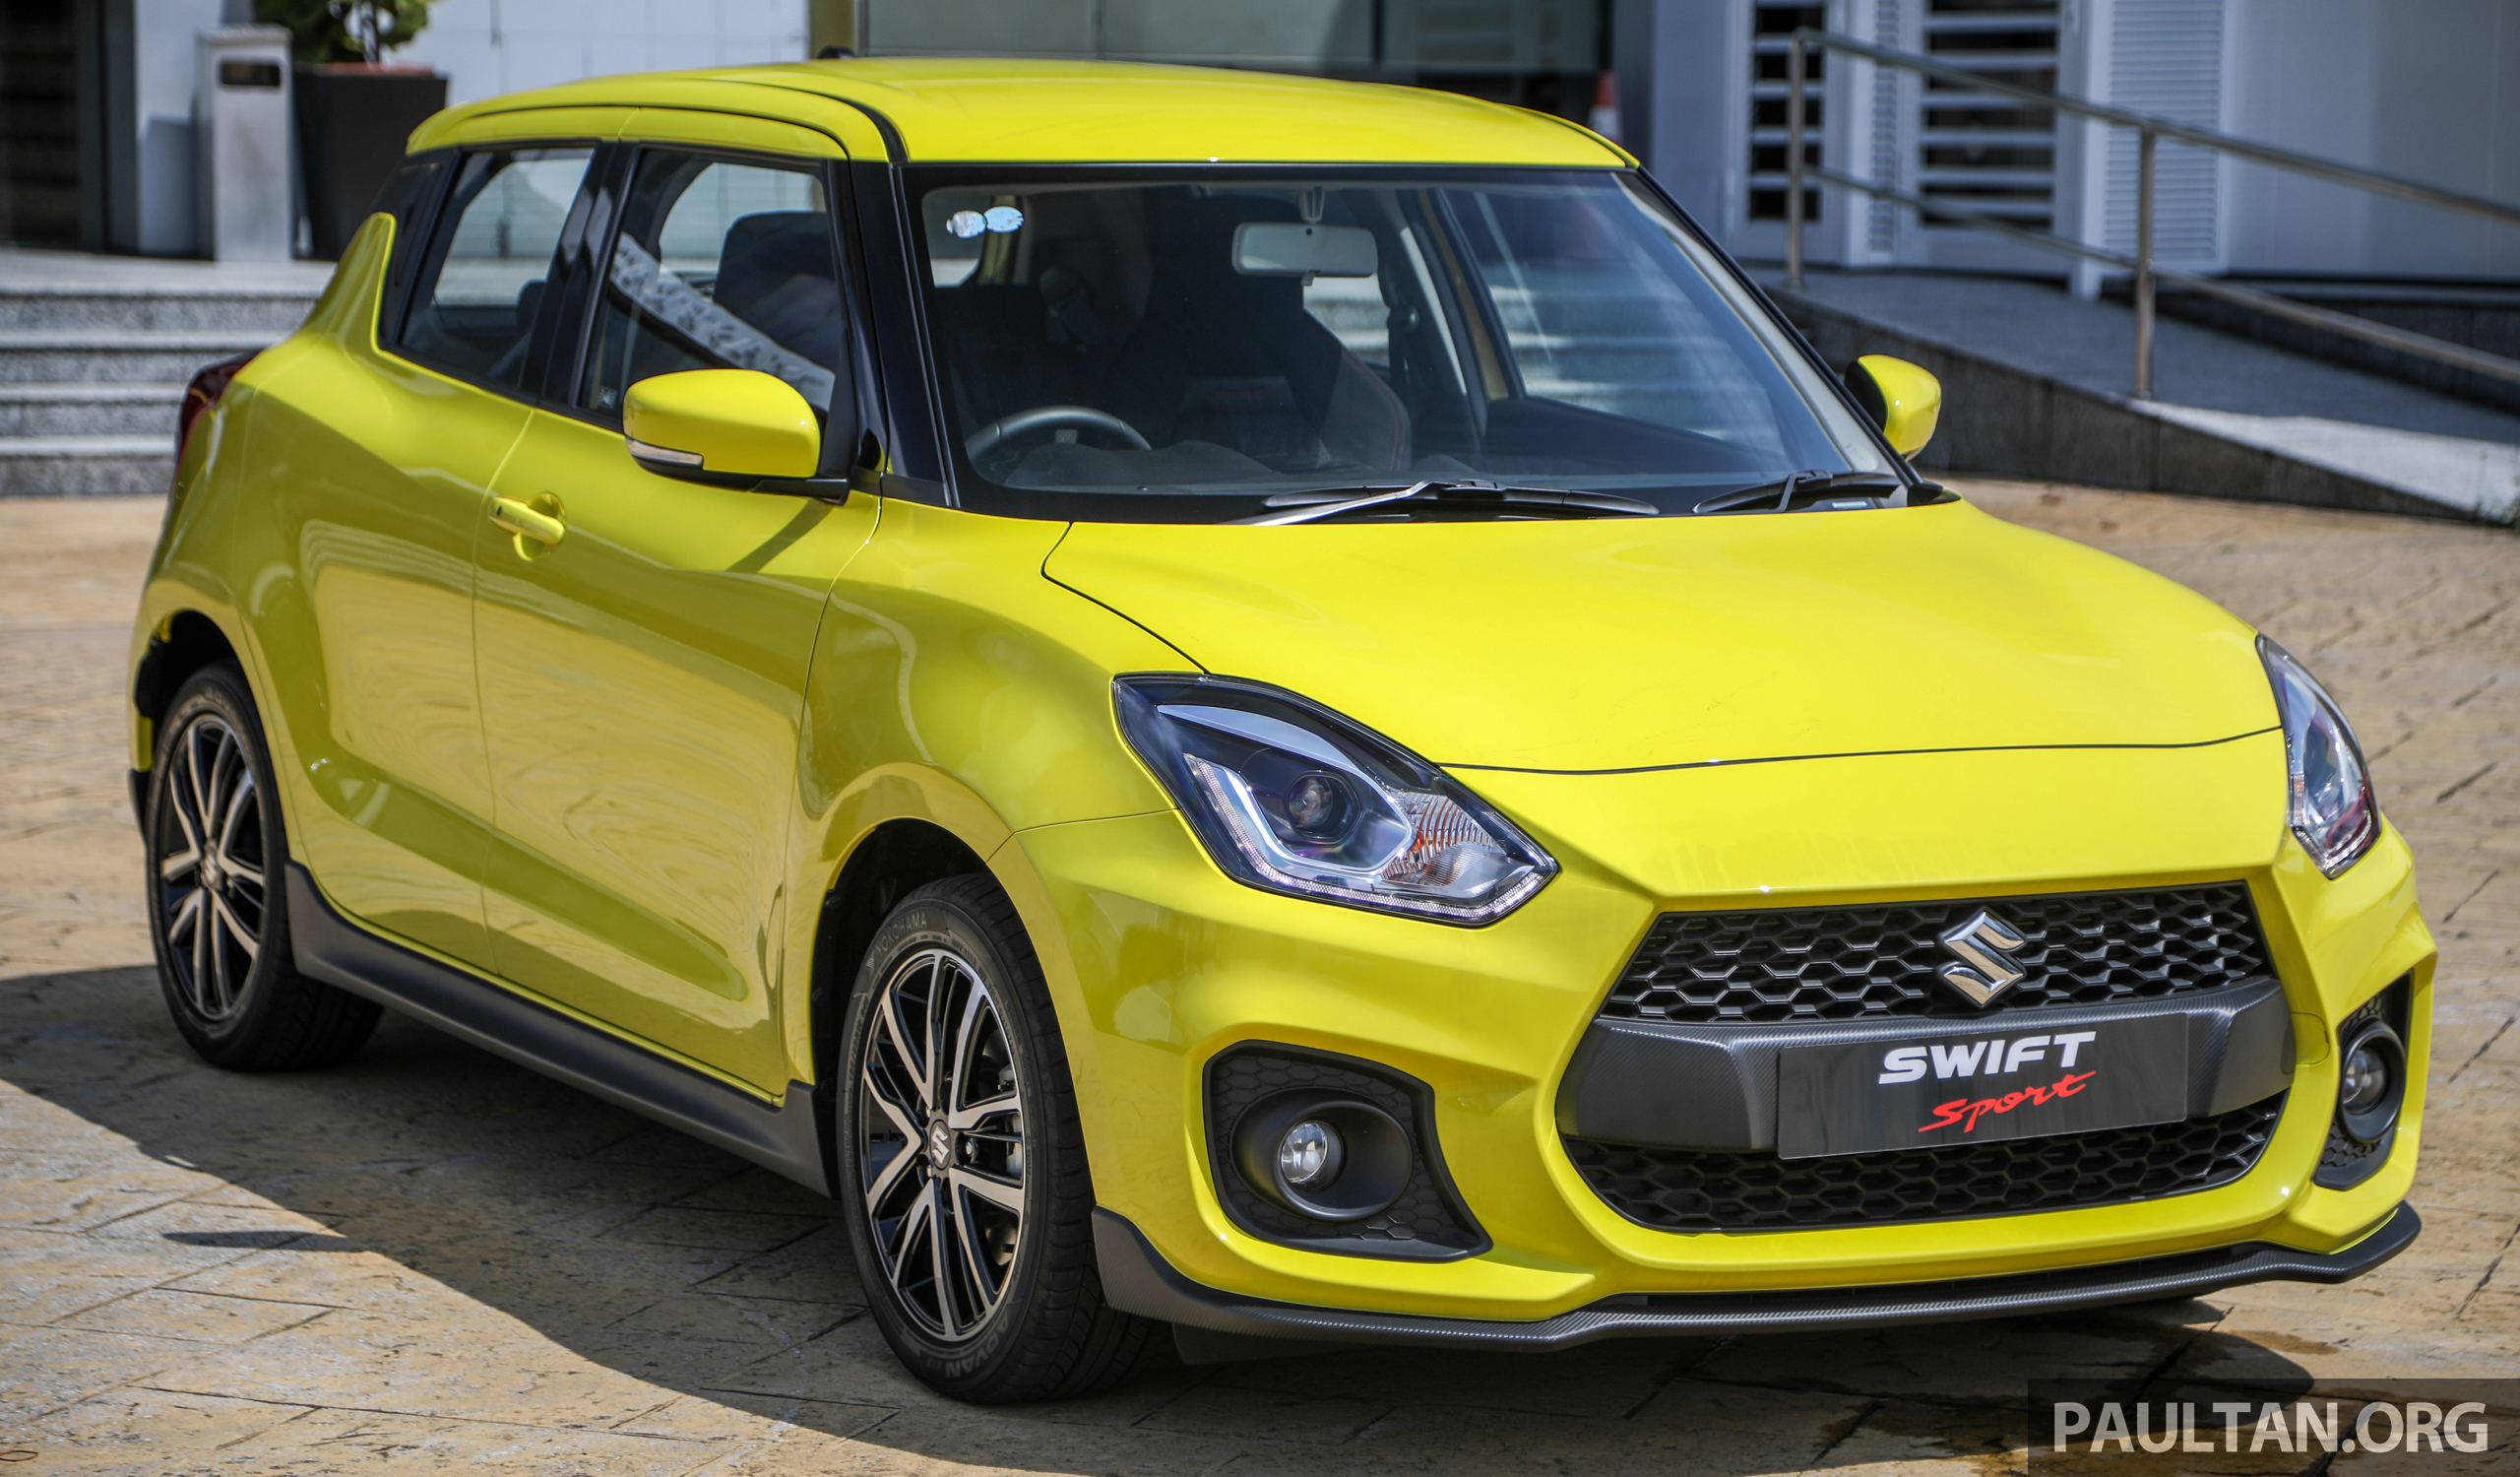 2021 Suzuki Swift Sport launched in Malaysia - 1.4L turbo, 140 hp, 230 Nm,  6AT-only, no manual, RM140k 